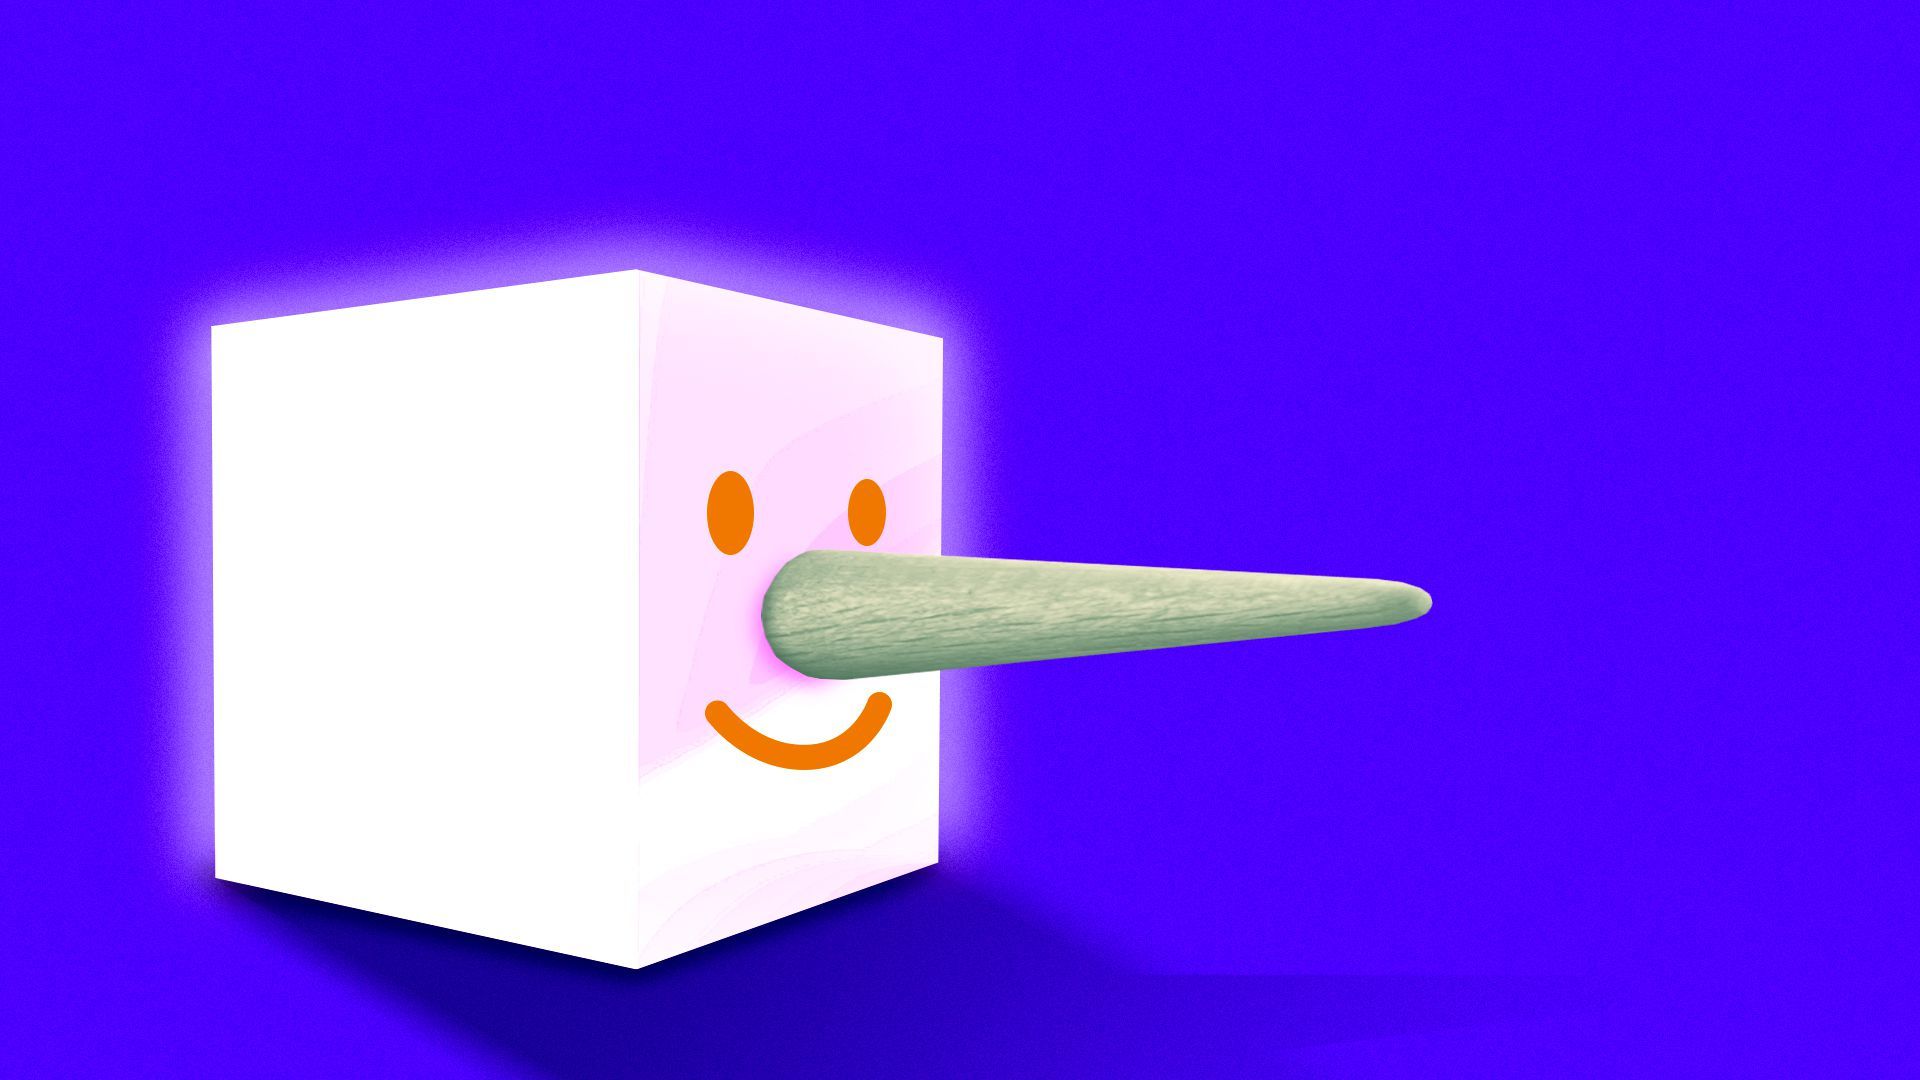 Illustration of a cube with a smiley face and long Pinocchio nose